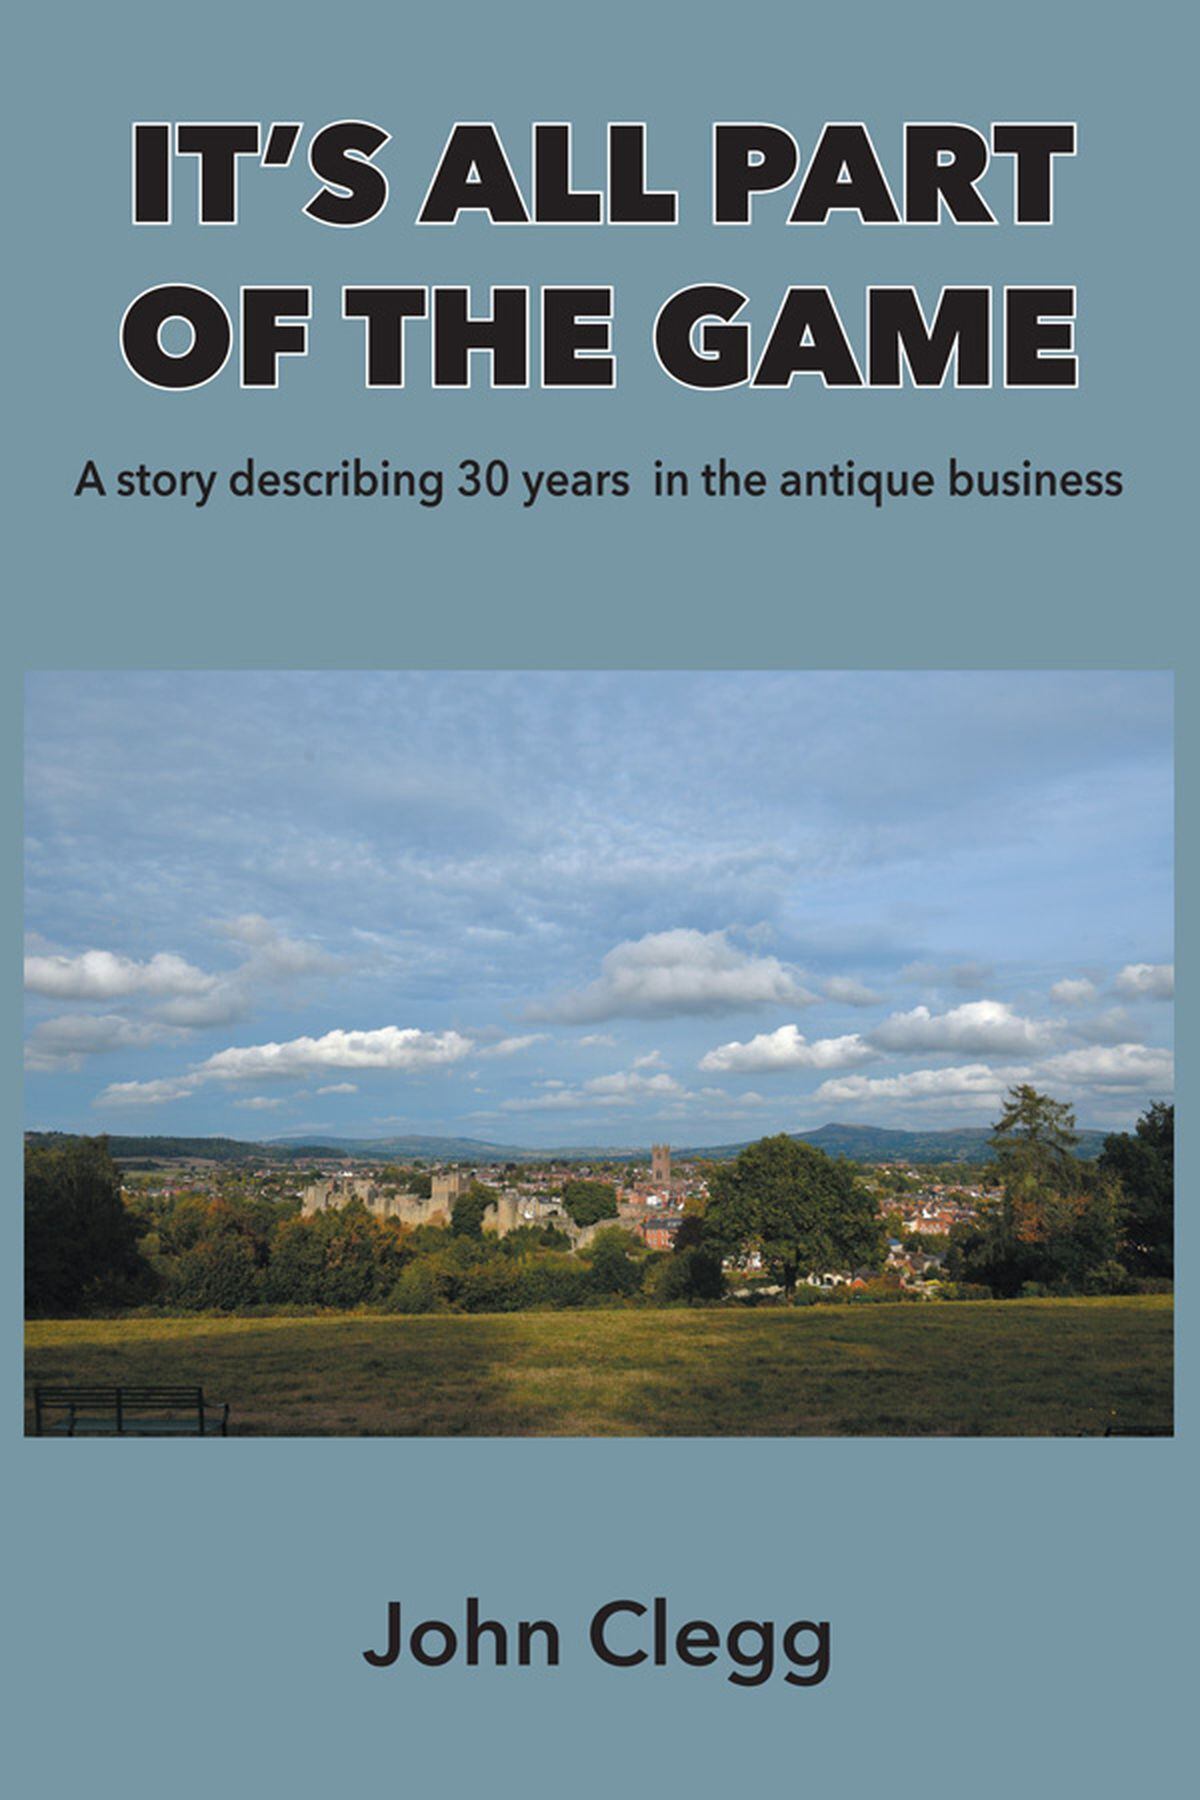 It's All Part Of The Game by John Clegg